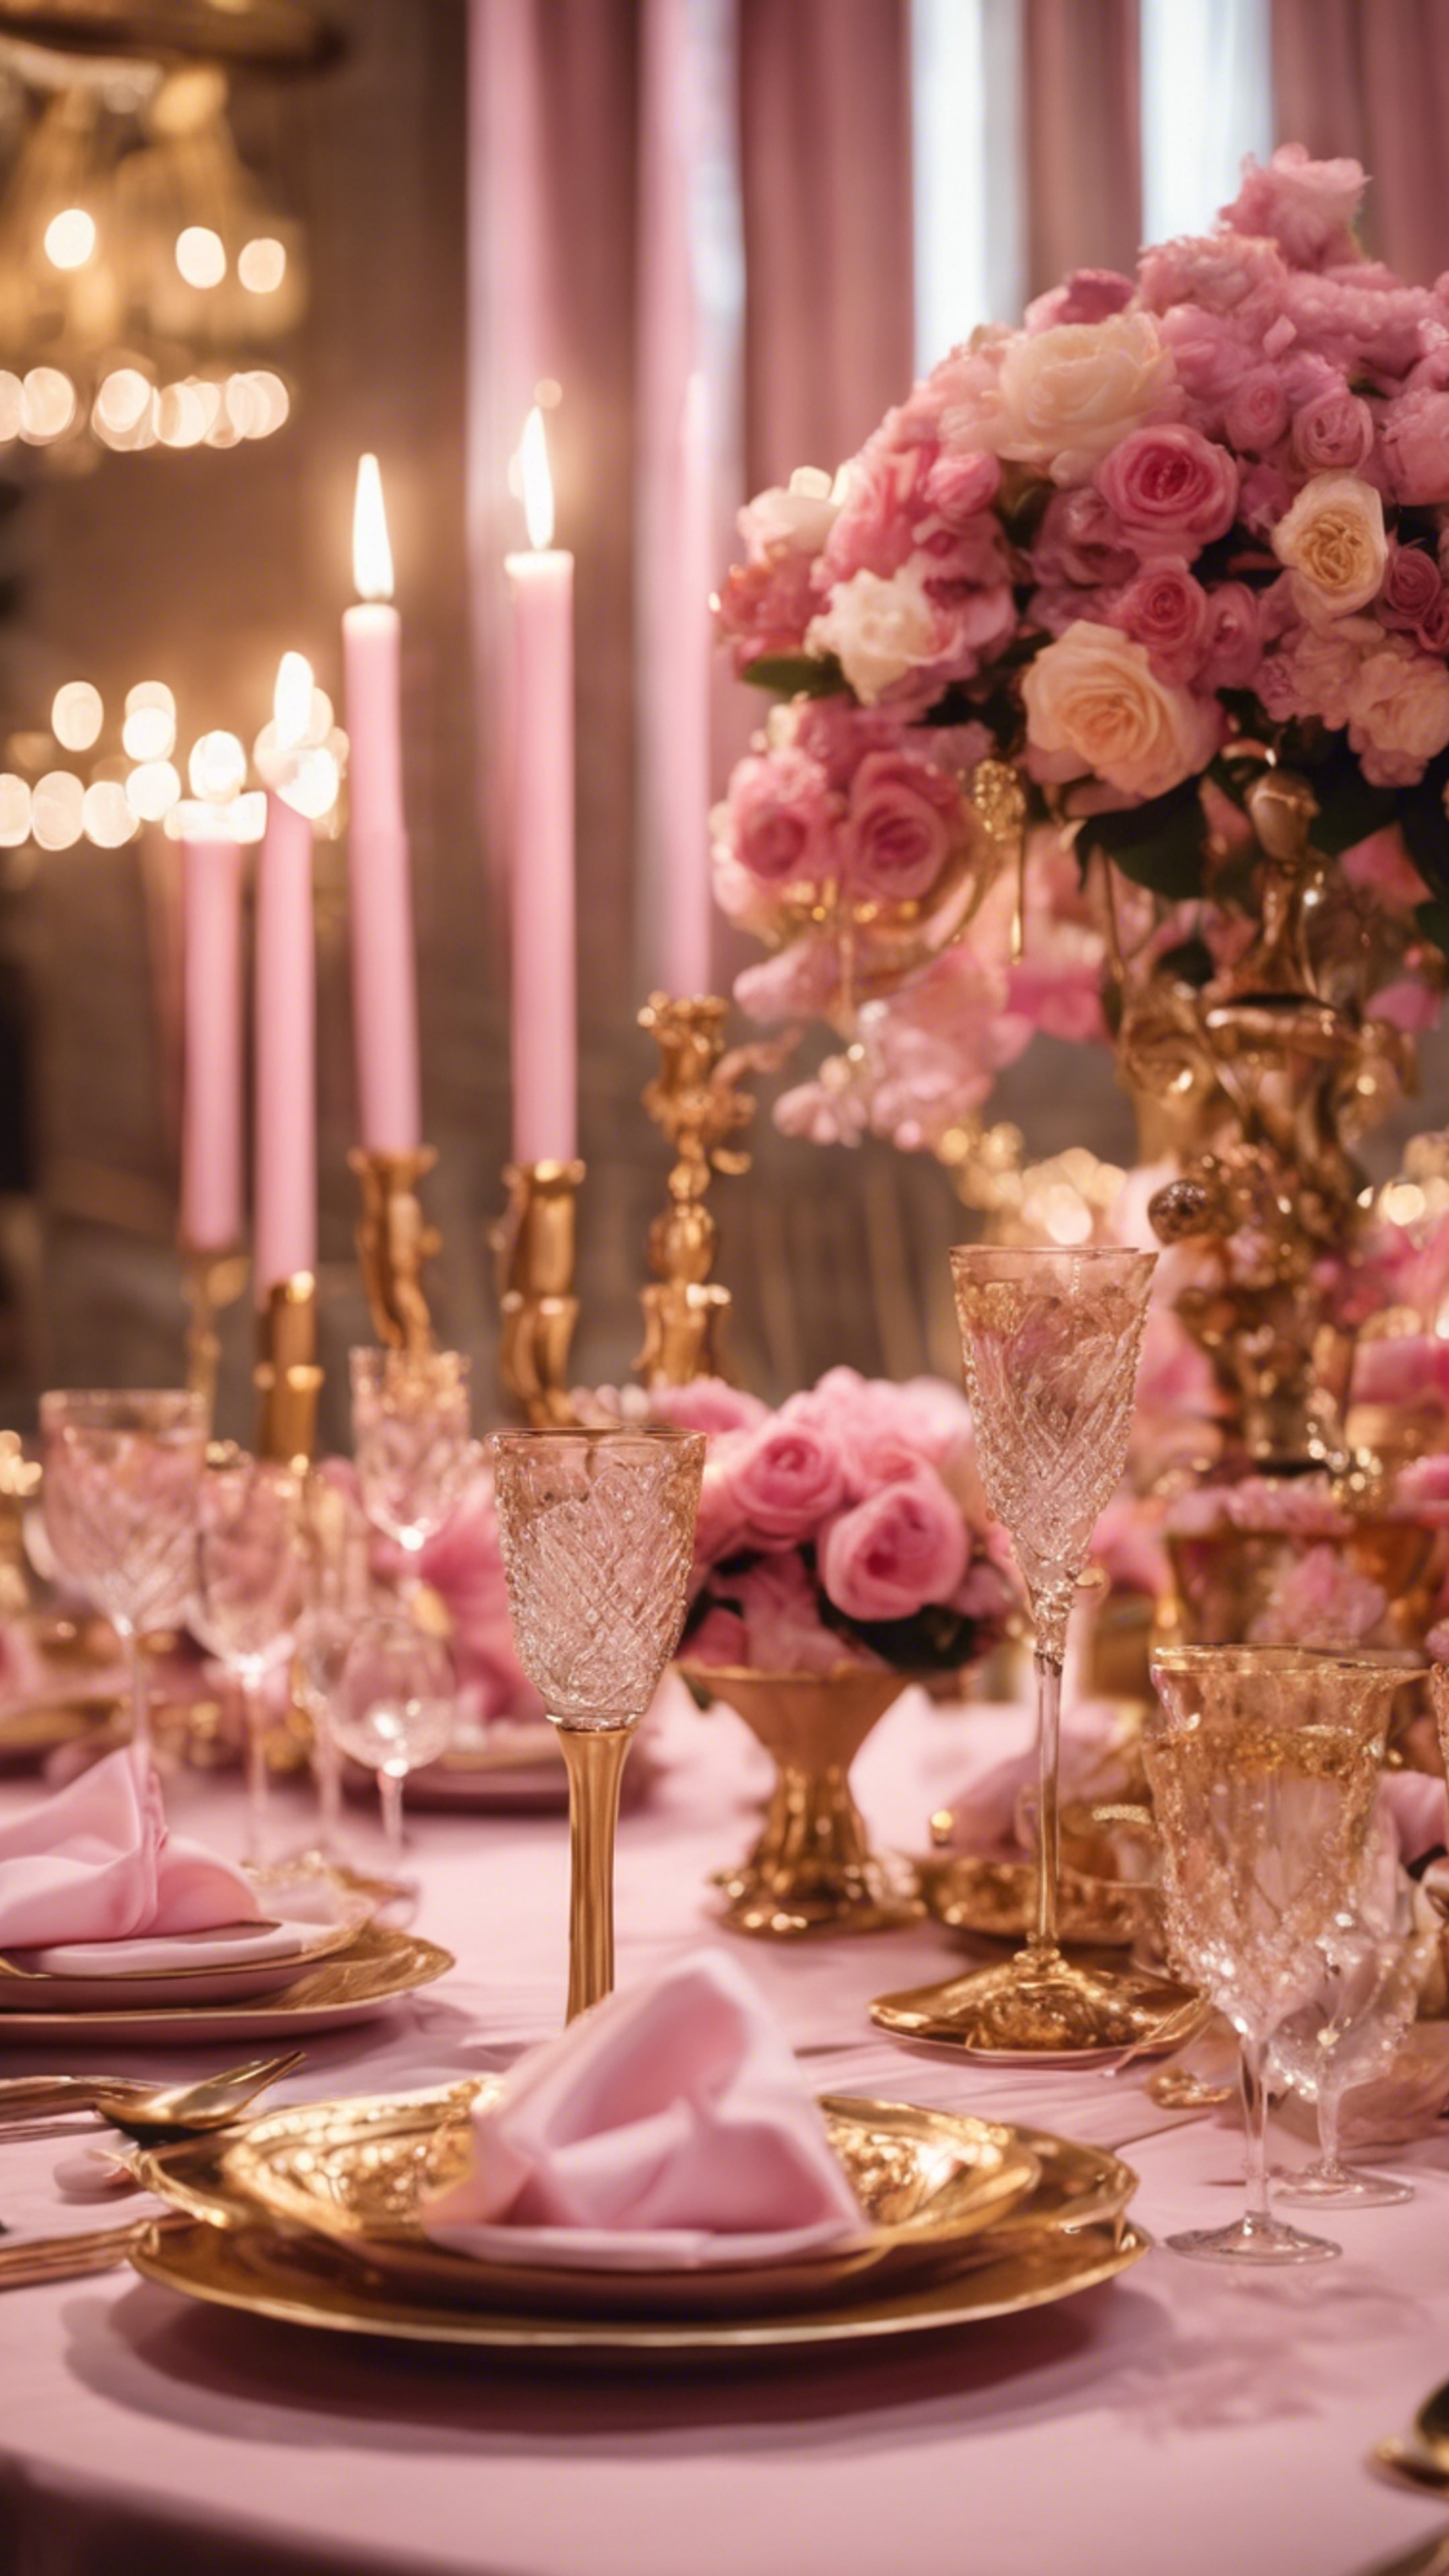 An elegant pink and gold-themed dining table set for an evening soiree. Fondo de pantalla[a96f4c3be44f41948a30]